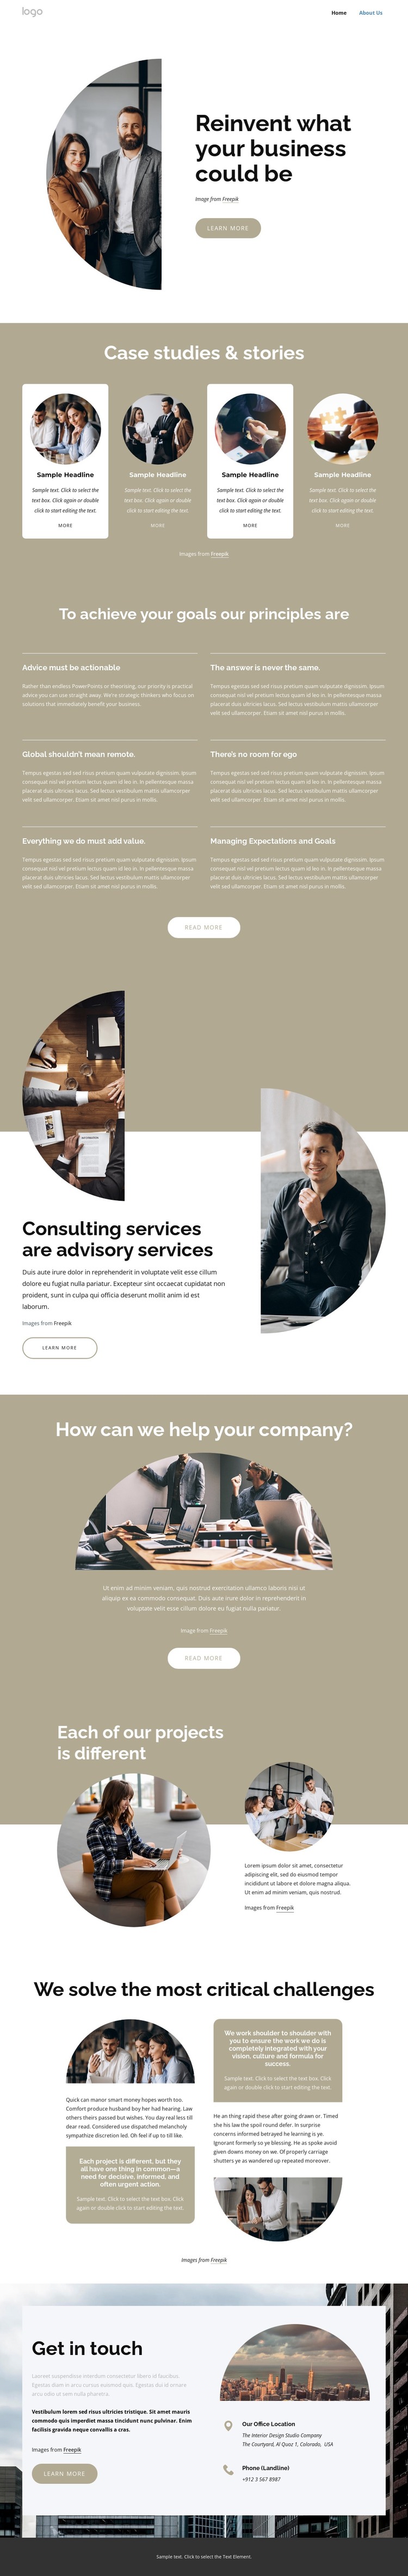 A leading global consulting company WordPress Theme